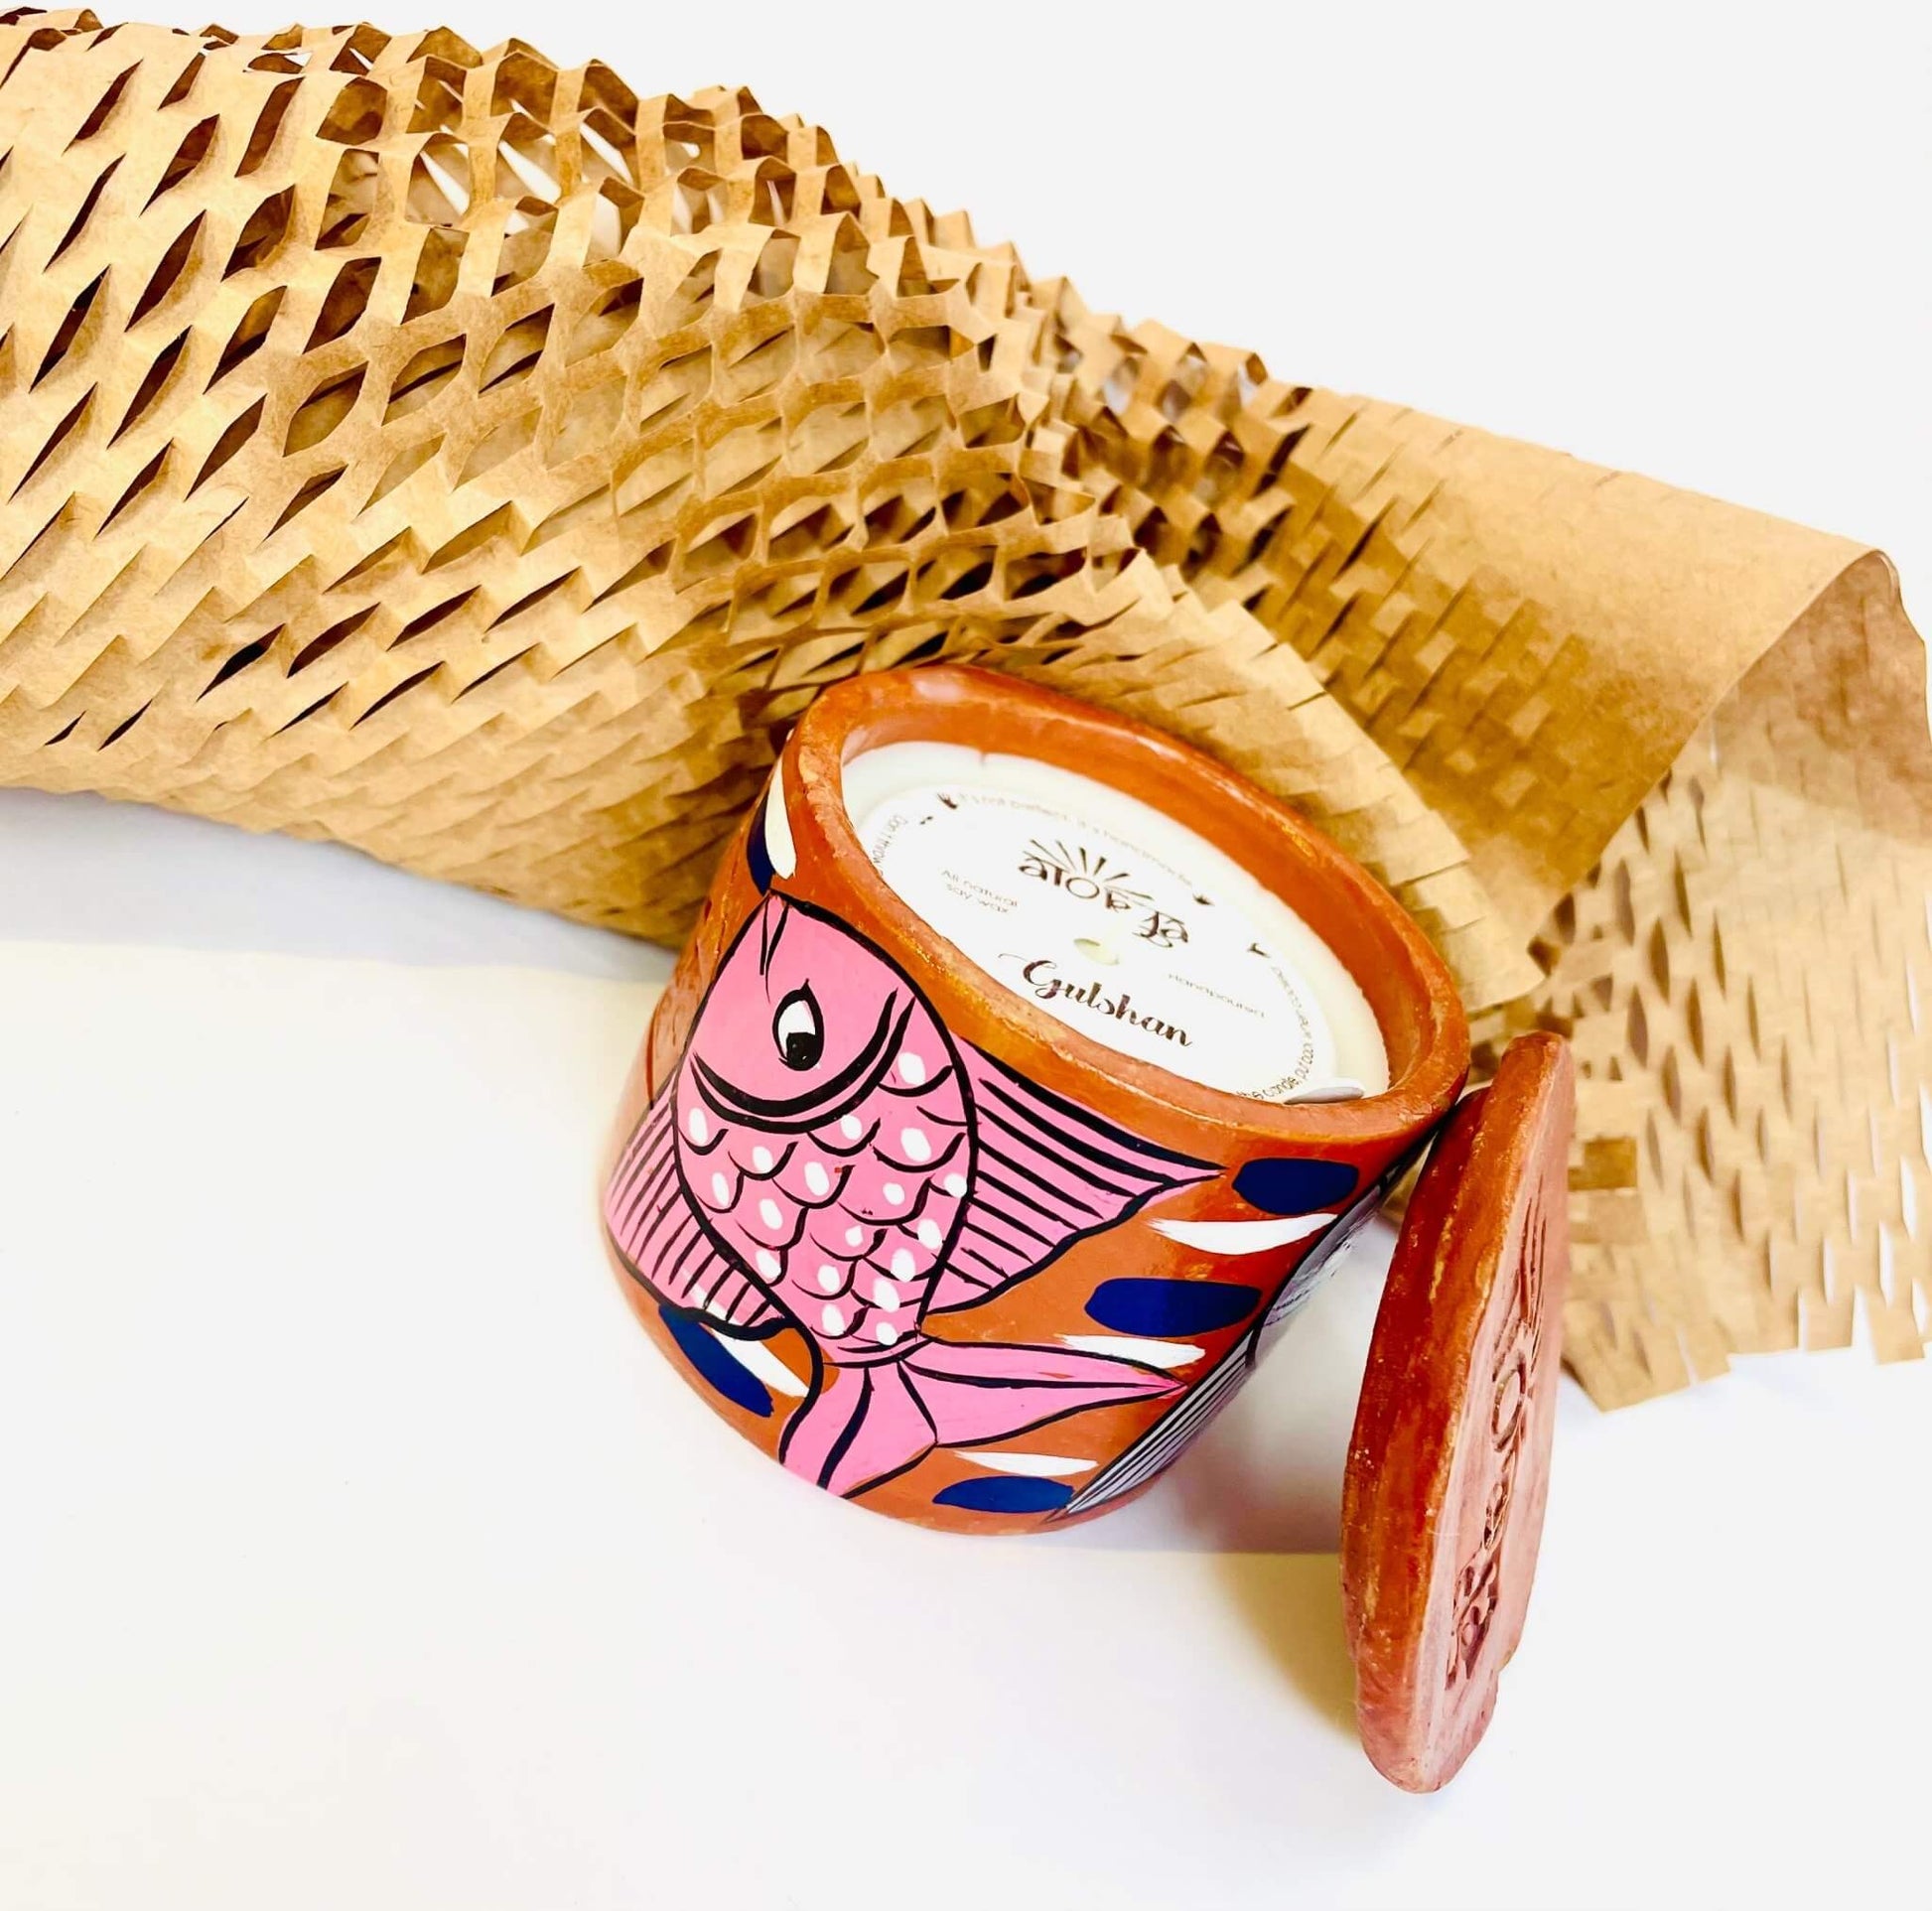 Scented candle in a terracotta jar painted with pink fish. The candle is protected with seed paper while candle snuffer and honeycomb paper are placed around it.